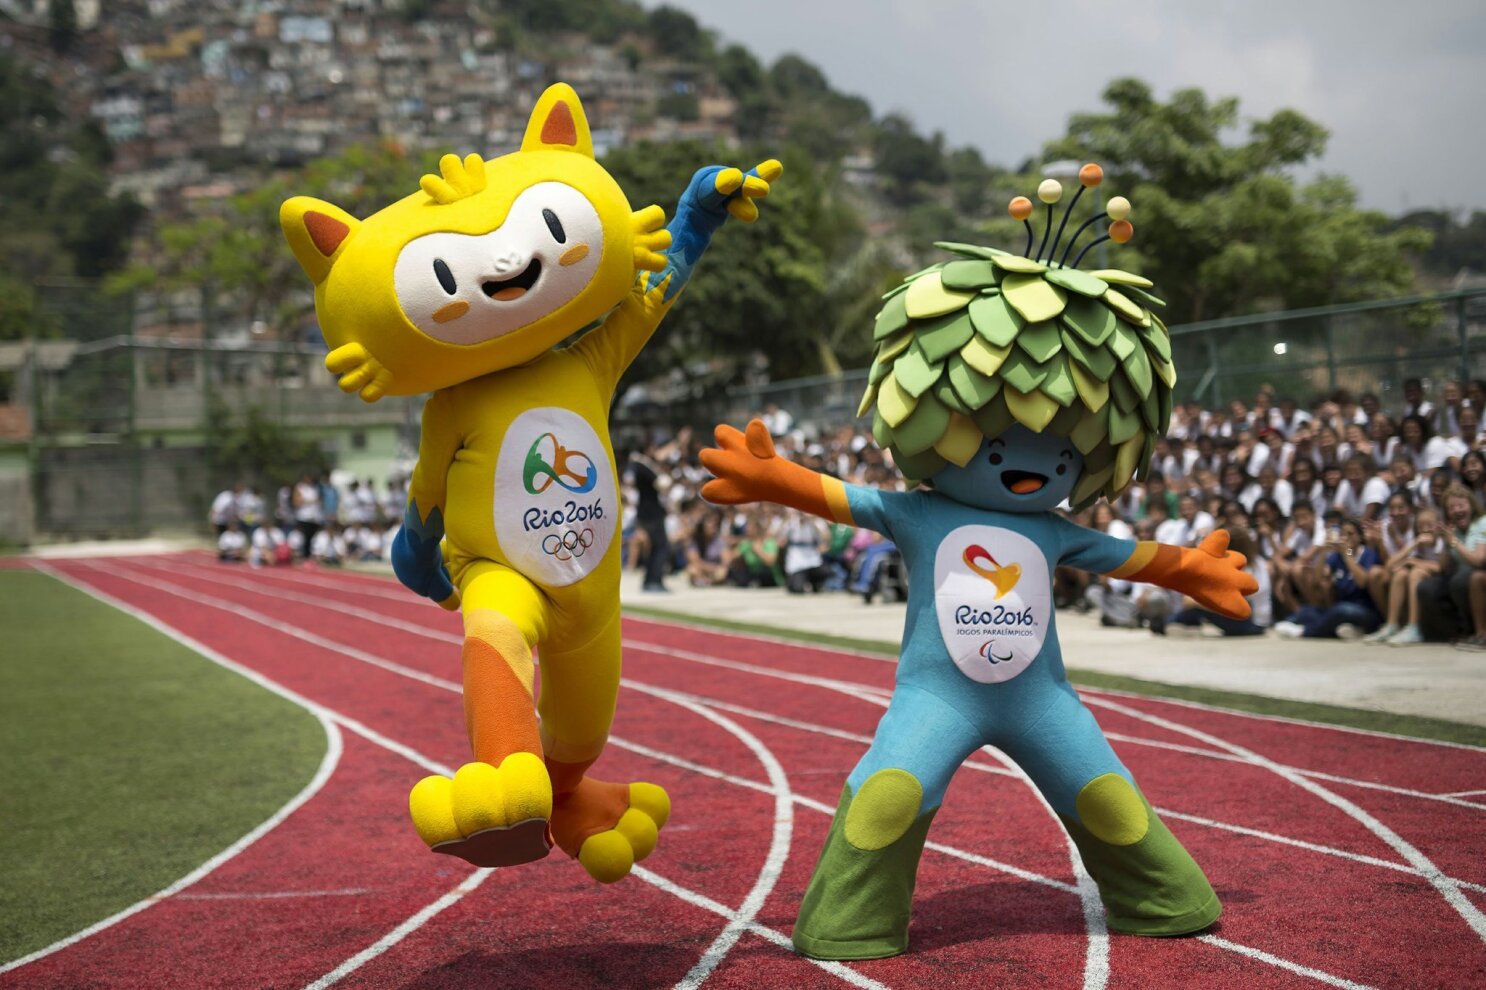 Vinicius And Tom Named 16 Olympics Mascots The San Diego Union Tribune